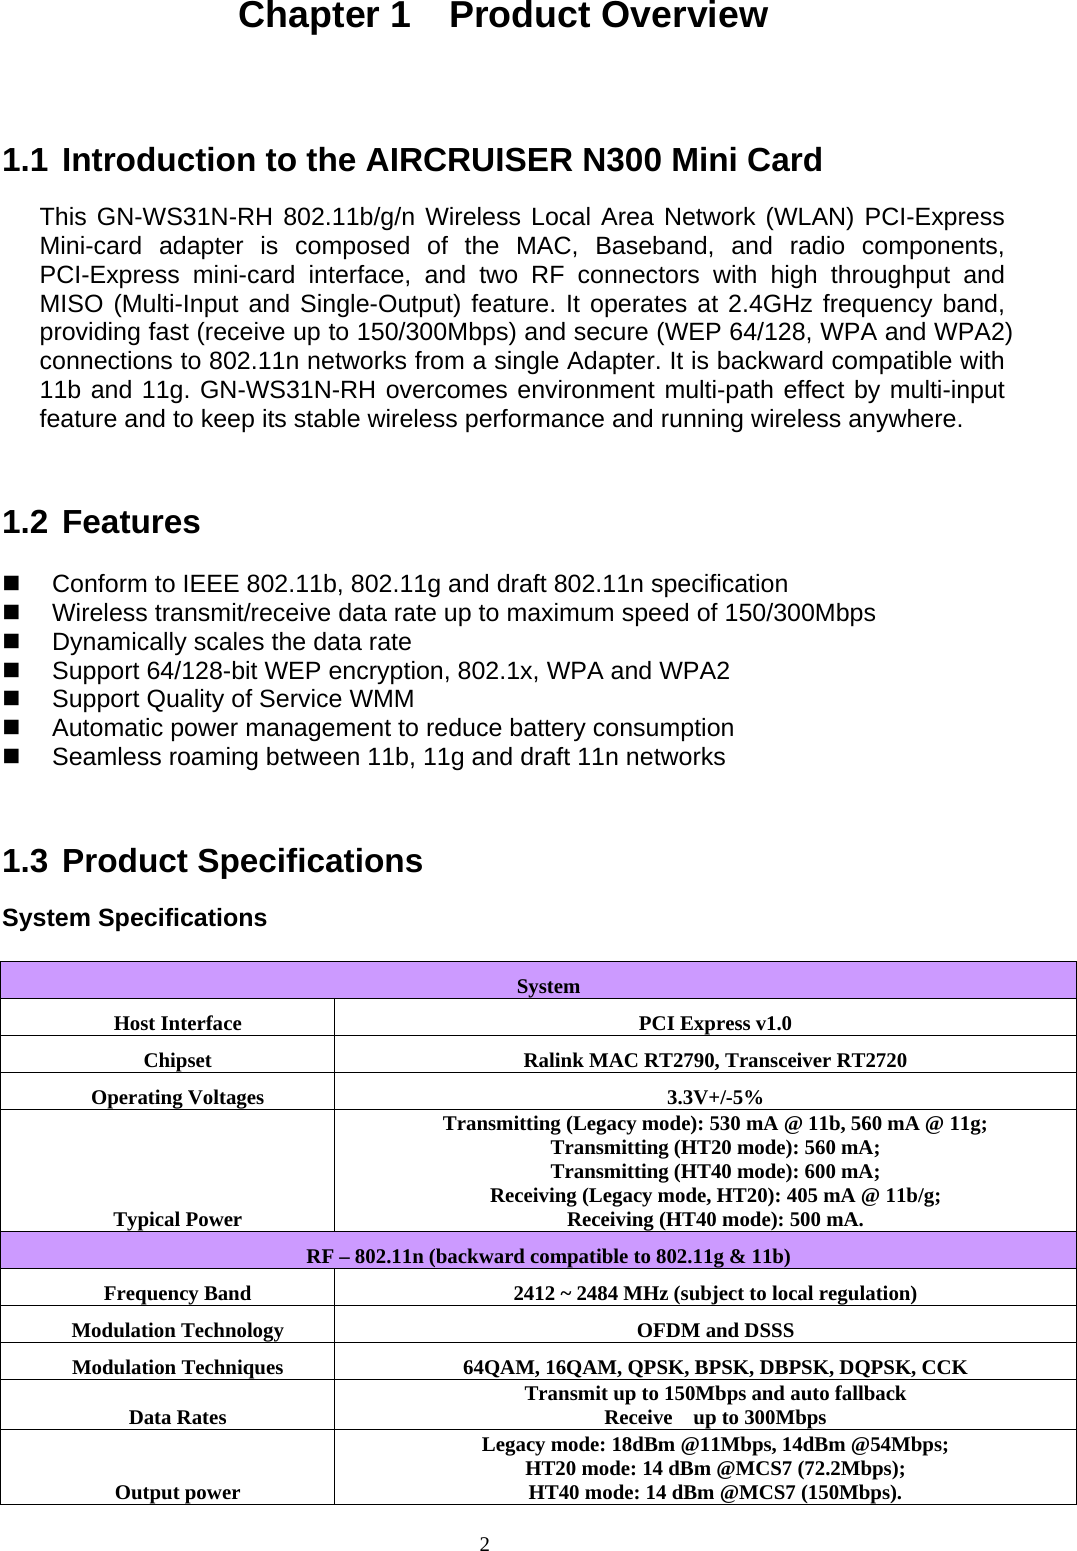 Chapter 1  Product Overview   1.1 Introduction to the AIRCRUISER N300 Mini Card  This GN-WS31N-RH 802.11b/g/n Wireless Local Area Network (WLAN) PCI-Express Mini-card adapter is composed of the MAC, Baseband, and radio components, PCI-Express mini-card interface, and two RF connectors with high throughput and MISO (Multi-Input and Single-Output) feature. It operates at 2.4GHz frequency band, providing fast (receive up to 150/300Mbps) and secure (WEP 64/128, WPA and WPA2) connections to 802.11n networks from a single Adapter. It is backward compatible with 11b and 11g. GN-WS31N-RH overcomes environment multi-path effect by multi-input feature and to keep its stable wireless performance and running wireless anywhere.   1.2 Features    Conform to IEEE 802.11b, 802.11g and draft 802.11n specification   Wireless transmit/receive data rate up to maximum speed of 150/300Mbps   Dynamically scales the data rate   Support 64/128-bit WEP encryption, 802.1x, WPA and WPA2   Support Quality of Service WMM   Automatic power management to reduce battery consumption   Seamless roaming between 11b, 11g and draft 11n networks   1.3 Product Specifications  System Specifications  System Host Interface  PCI Express v1.0 Chipset  Ralink MAC RT2790, Transceiver RT2720 Operating Voltages  3.3V+/-5% Typical Power Transmitting (Legacy mode): 530 mA @ 11b, 560 mA @ 11g; Transmitting (HT20 mode): 560 mA; Transmitting (HT40 mode): 600 mA; Receiving (Legacy mode, HT20): 405 mA @ 11b/g; Receiving (HT40 mode): 500 mA. RF – 802.11n (backward compatible to 802.11g &amp; 11b) Frequency Band  2412 ~ 2484 MHz (subject to local regulation) Modulation Technology  OFDM and DSSS Modulation Techniques  64QAM, 16QAM, QPSK, BPSK, DBPSK, DQPSK, CCK Data Rates  Transmit up to 150Mbps and auto fallback Receive  up to 300Mbps   Output power Legacy mode: 18dBm @11Mbps, 14dBm @54Mbps; HT20 mode: 14 dBm @MCS7 (72.2Mbps);   HT40 mode: 14 dBm @MCS7 (150Mbps). 2   